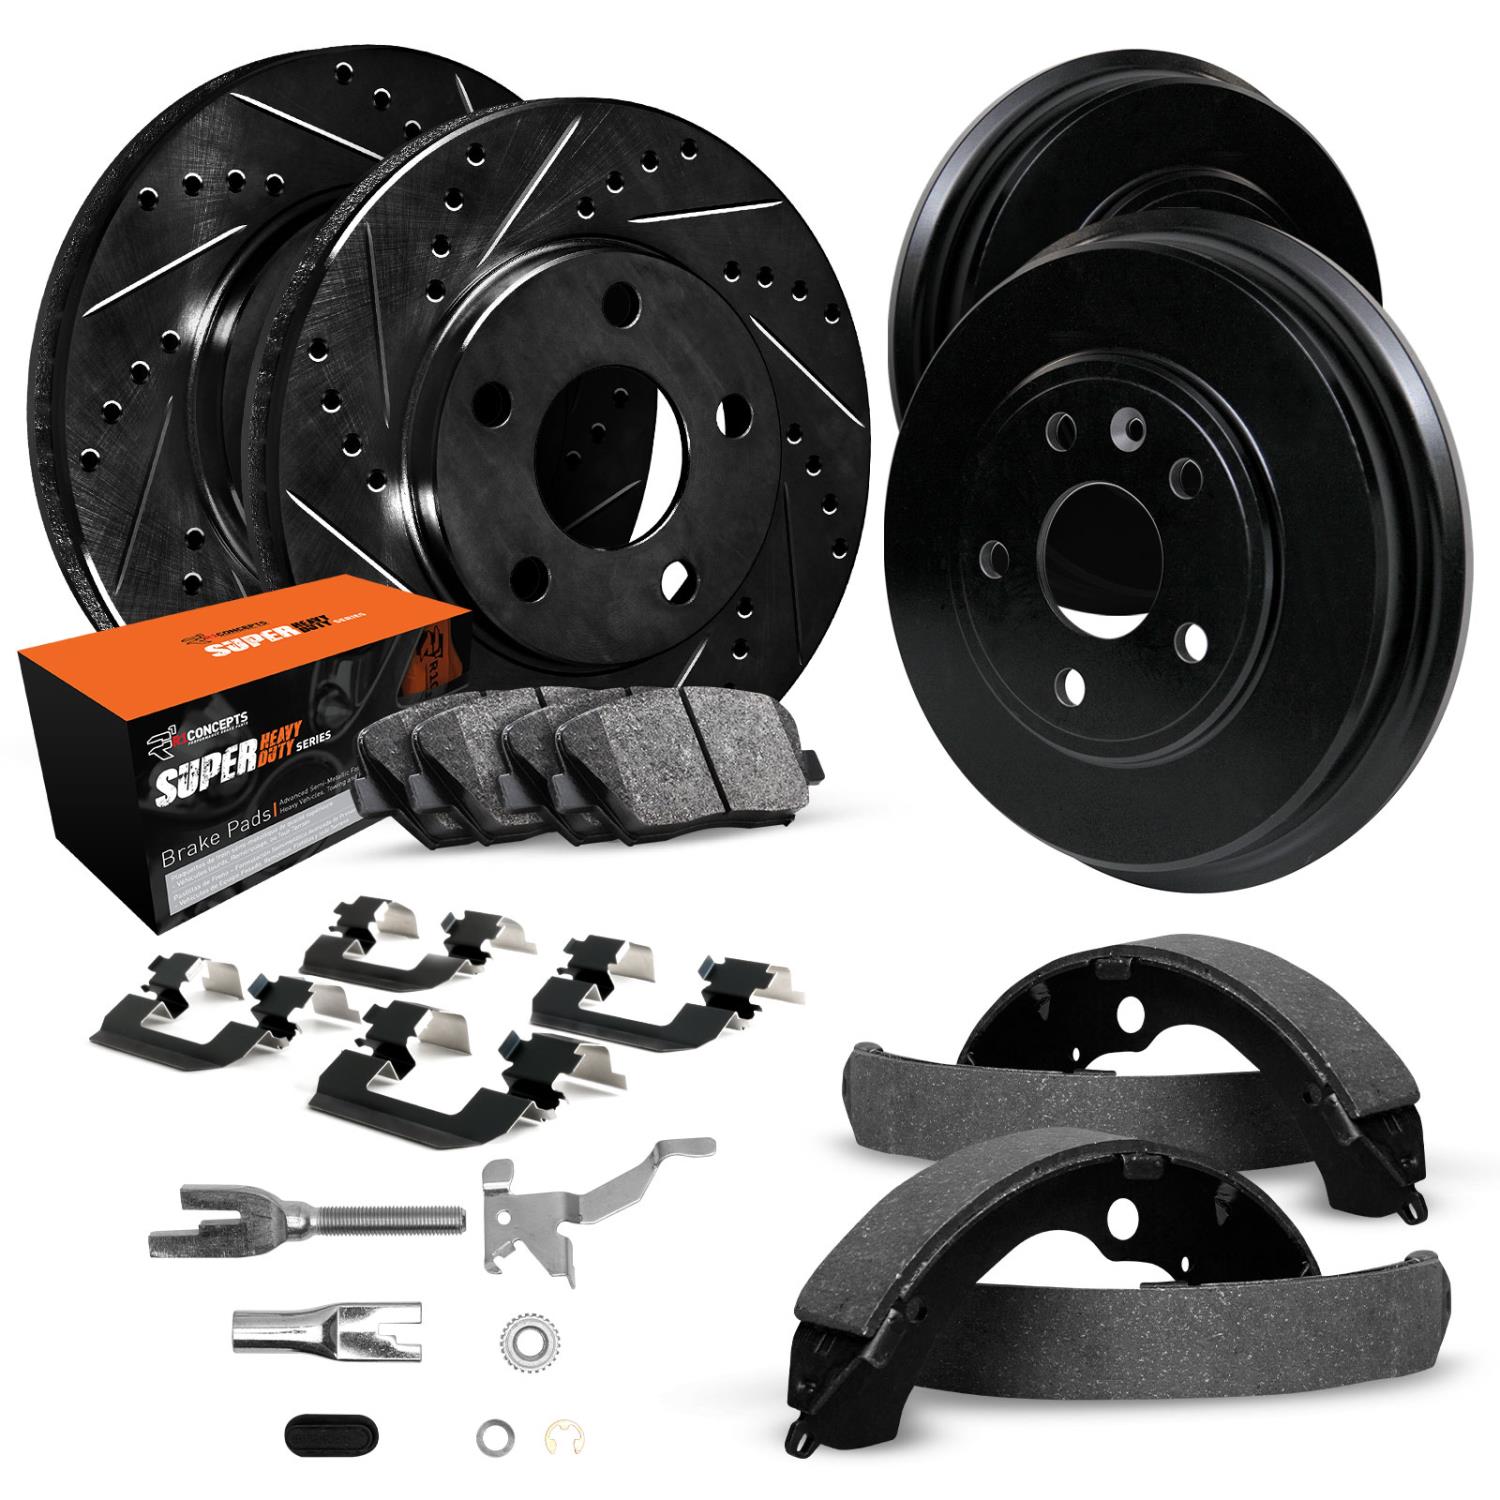 E-Line Drilled/Slotted Black Rotor & Drum Set w/Super-Duty Pads, Shoes, Hardware/Adjusters, 1974-1976 Ford/Lincoln/Mercury/Mazda